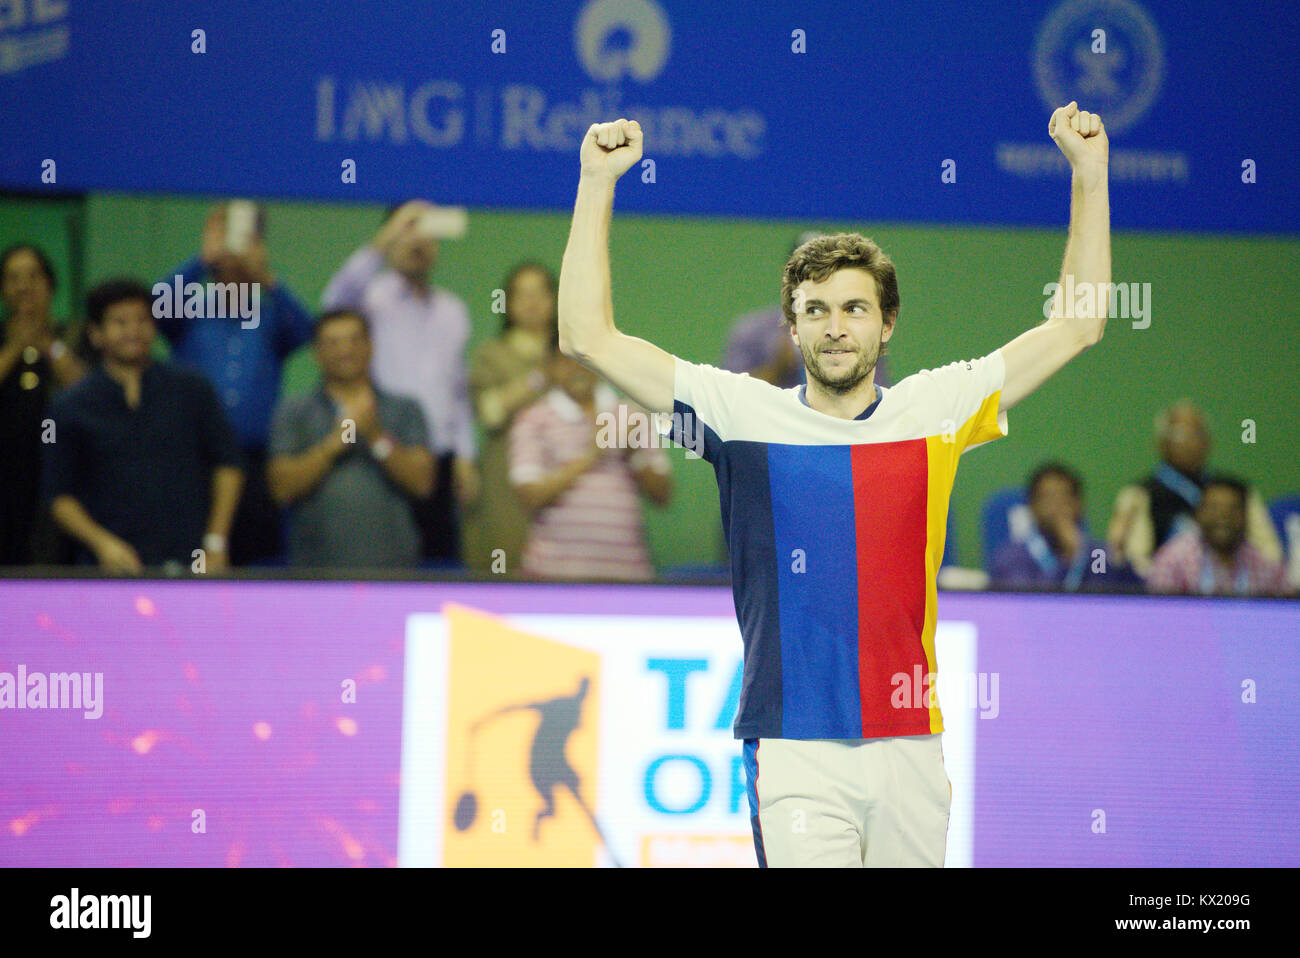 Pune, India. 6th January 2018. Gilles Simon of France gestures after winnning the finals of the singles competition at the Tata Open Maharashtra tournament at Mahalunge Balewadi Tennis Stadium in Pune, India. Credit: Karunesh Johri/Alamy Live News. Stock Photo